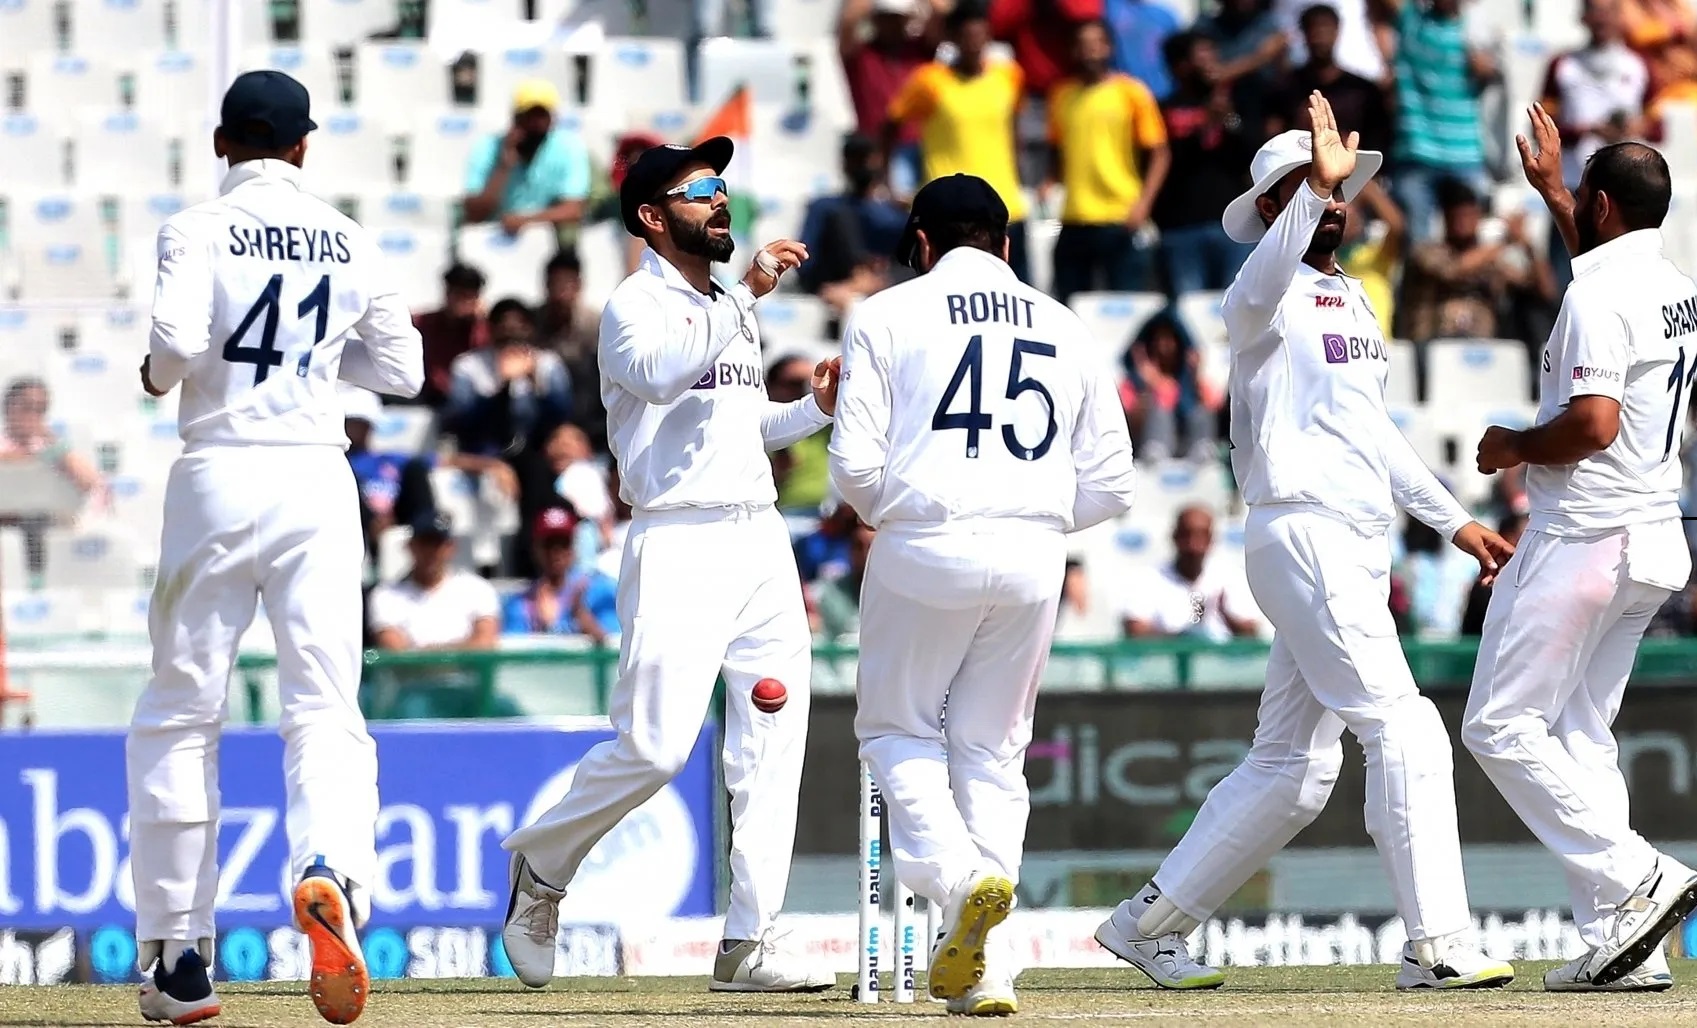 Indian team celebrates wicket of Dimuth Karunaratne who fell to Mohammad Shami | BCCI